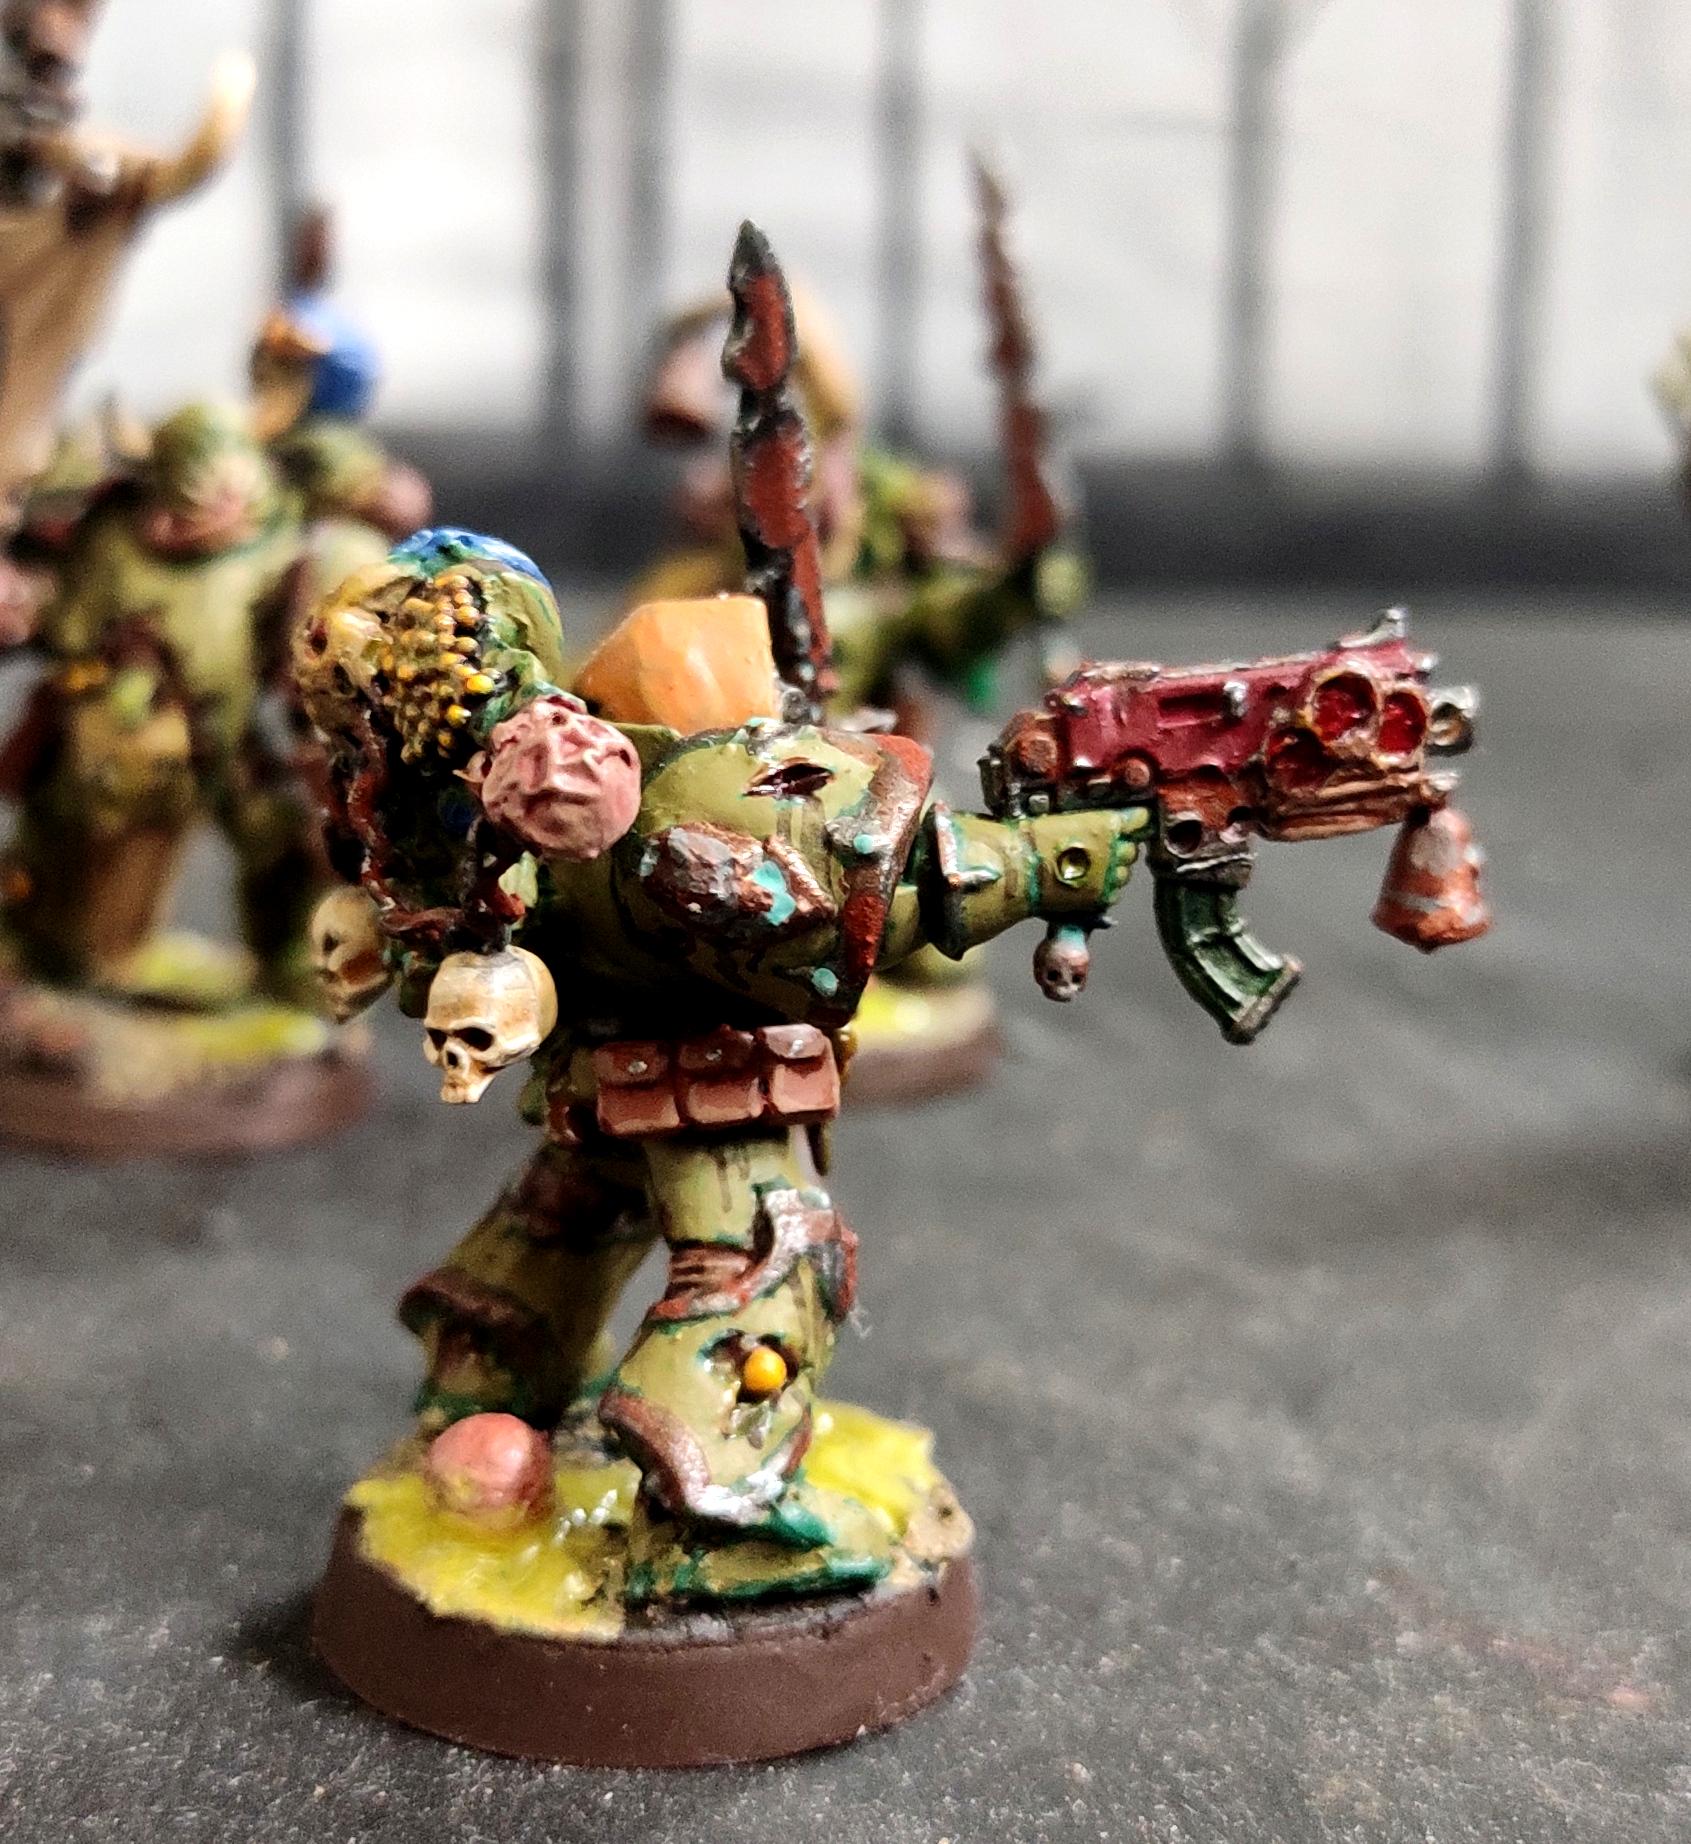 Blight, Bolter, Chaos, Chaos Space Marines, Conversion, Death Guard, Decay, Disease, Heresy, Heretic Astartes, Infantry, Nurgle, Pestilence, Plague, Plague Marines, Regiment, Rot, Rust, Sculpting, Traitor Legions, Warhammer 40,000